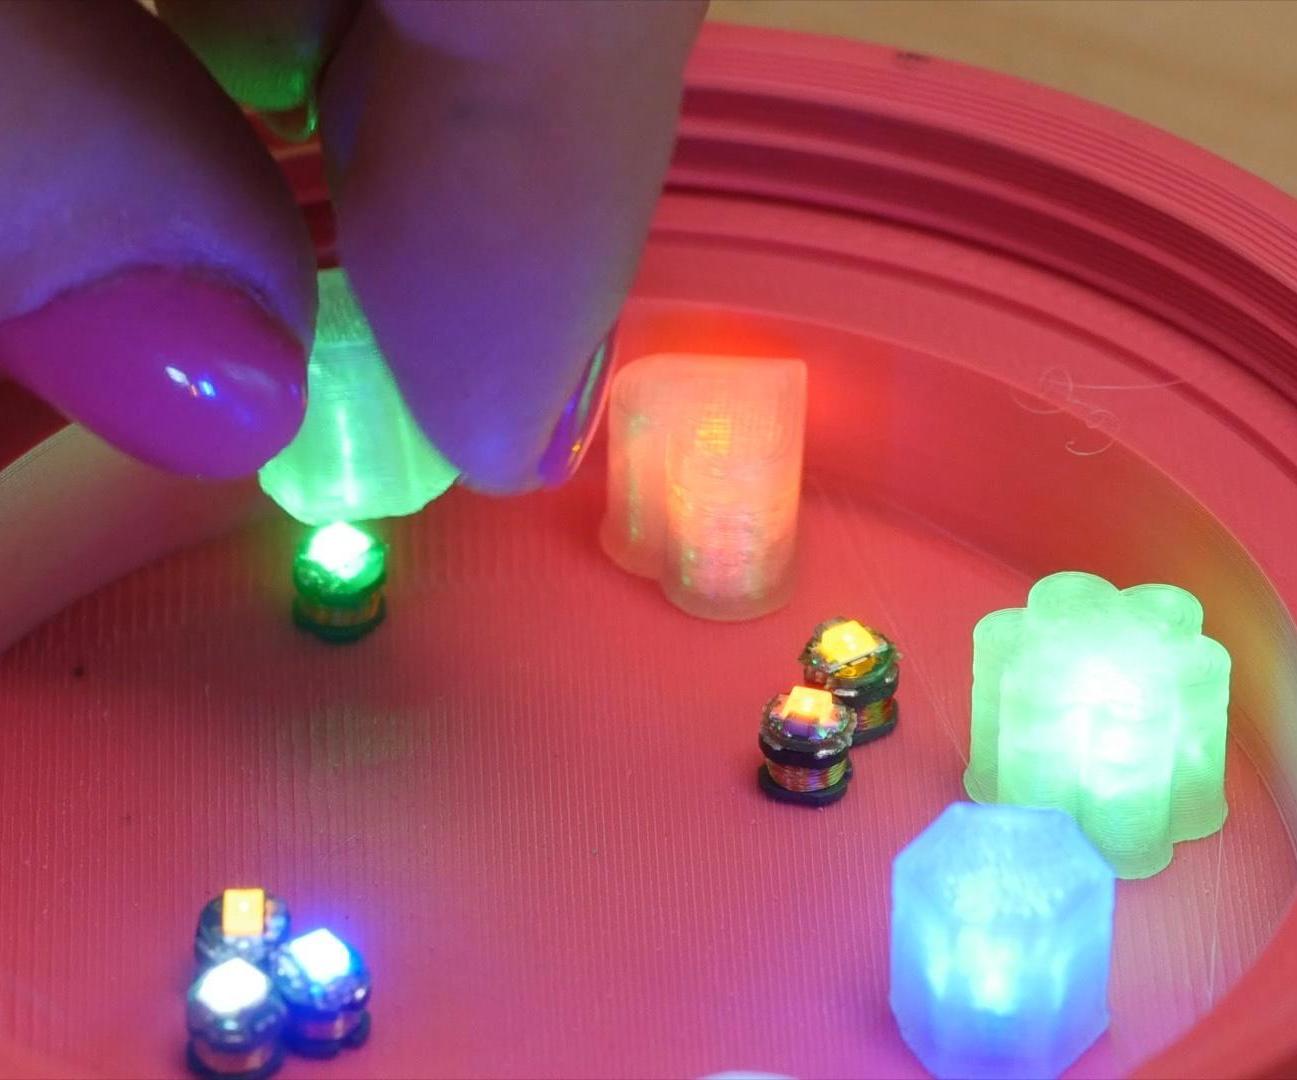 3D Printed Light-Up Kaleidoscope with Wireless LEDs